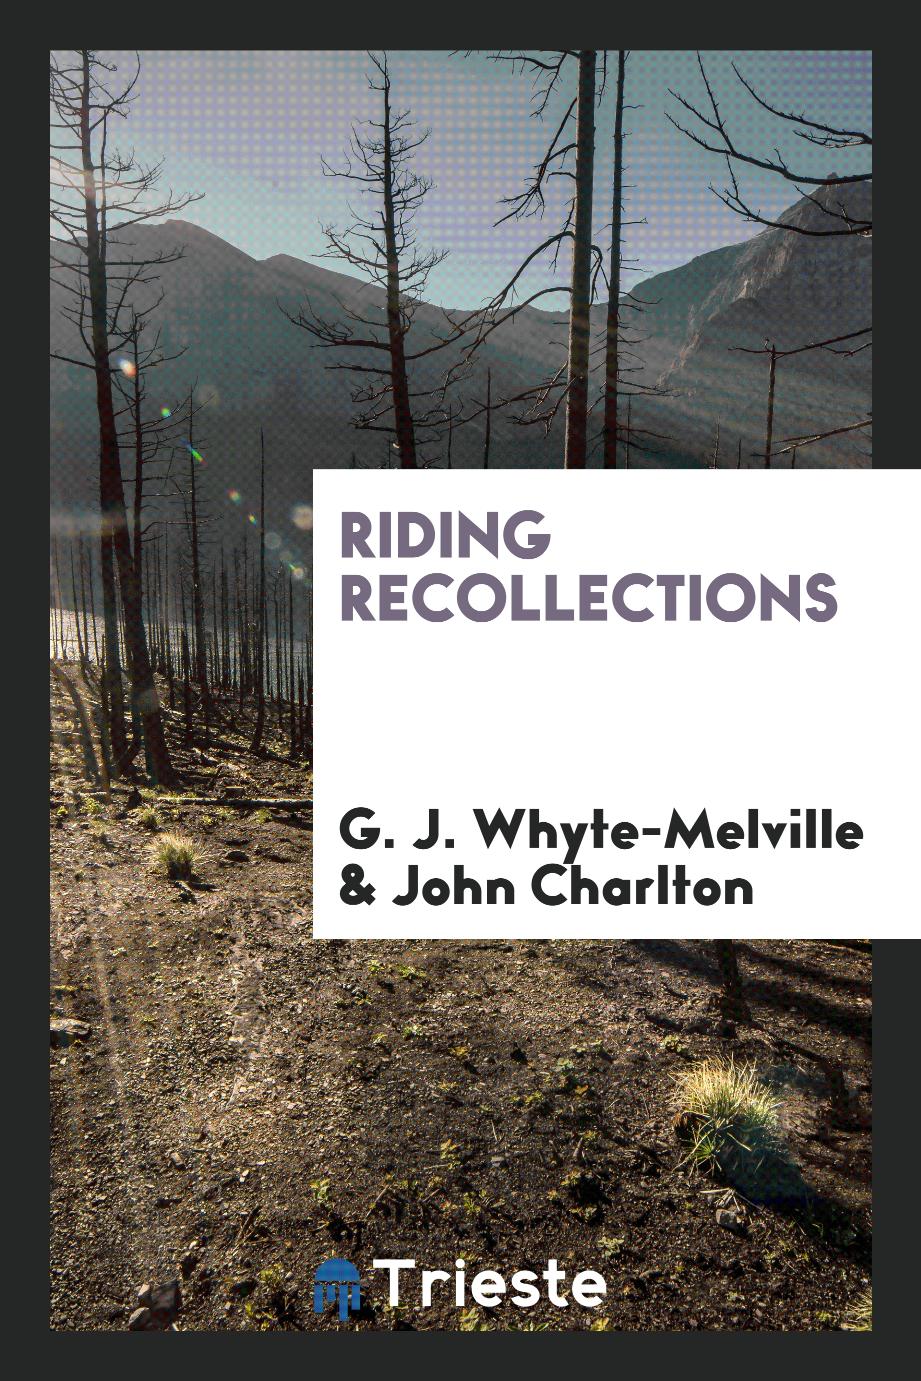 Riding recollections